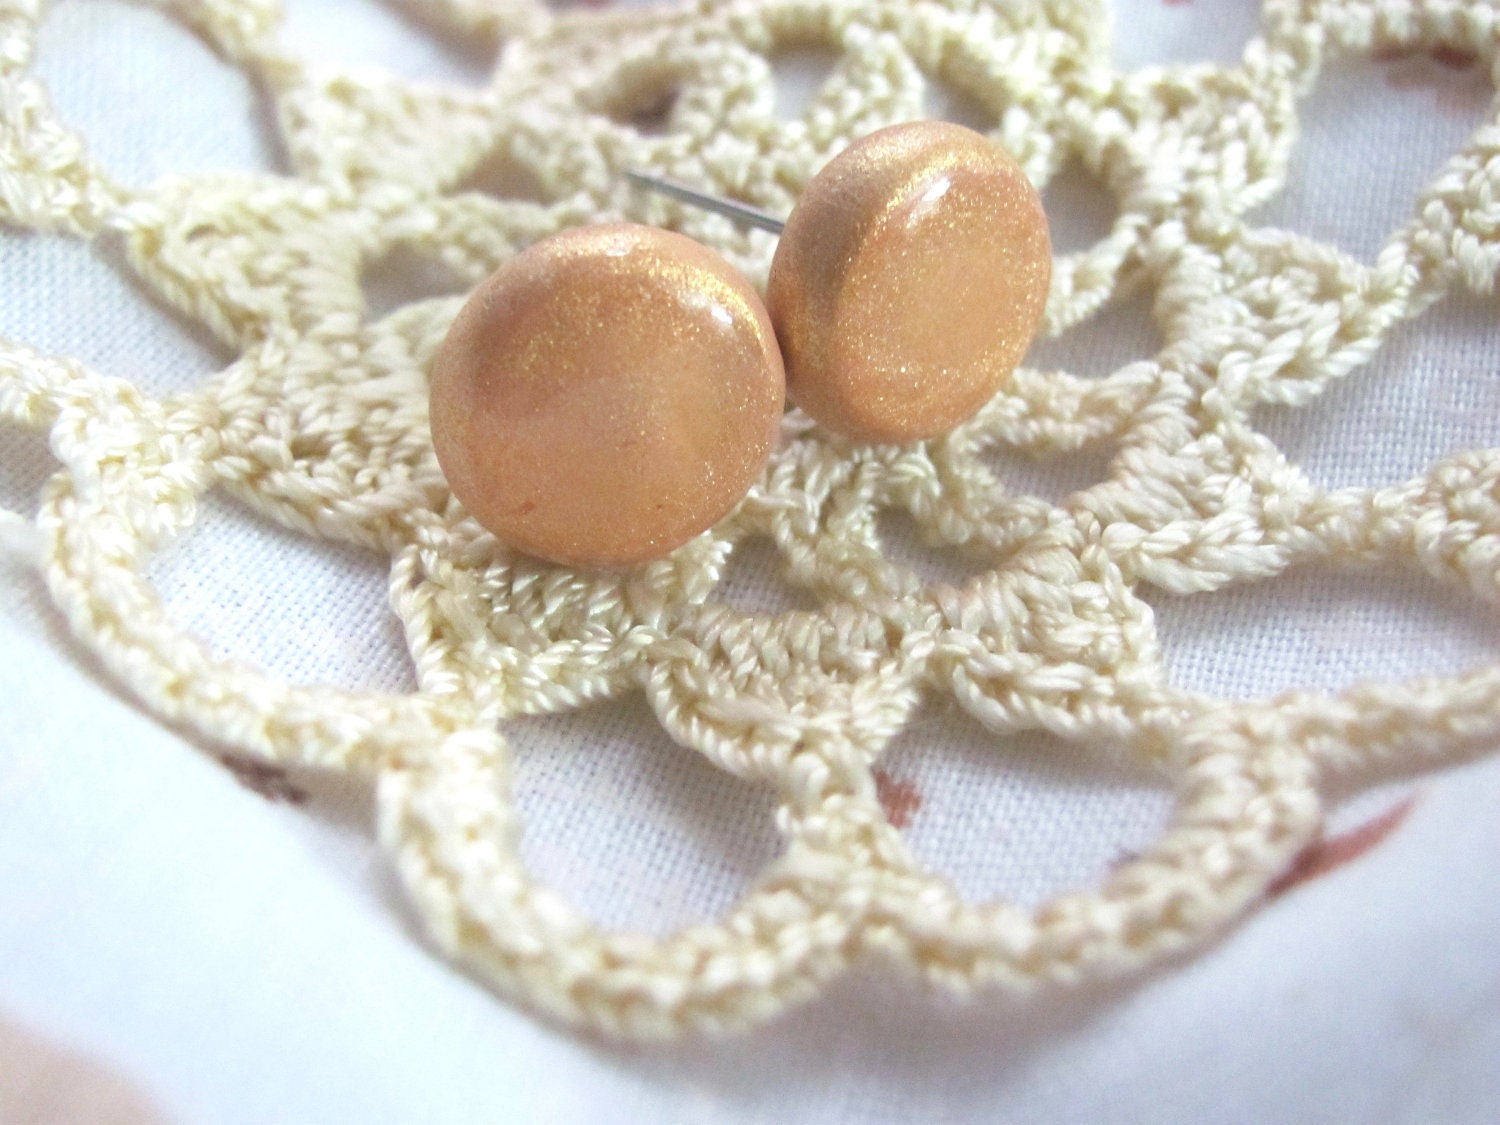 Yellow Raspberry - A pair of round stud earrings